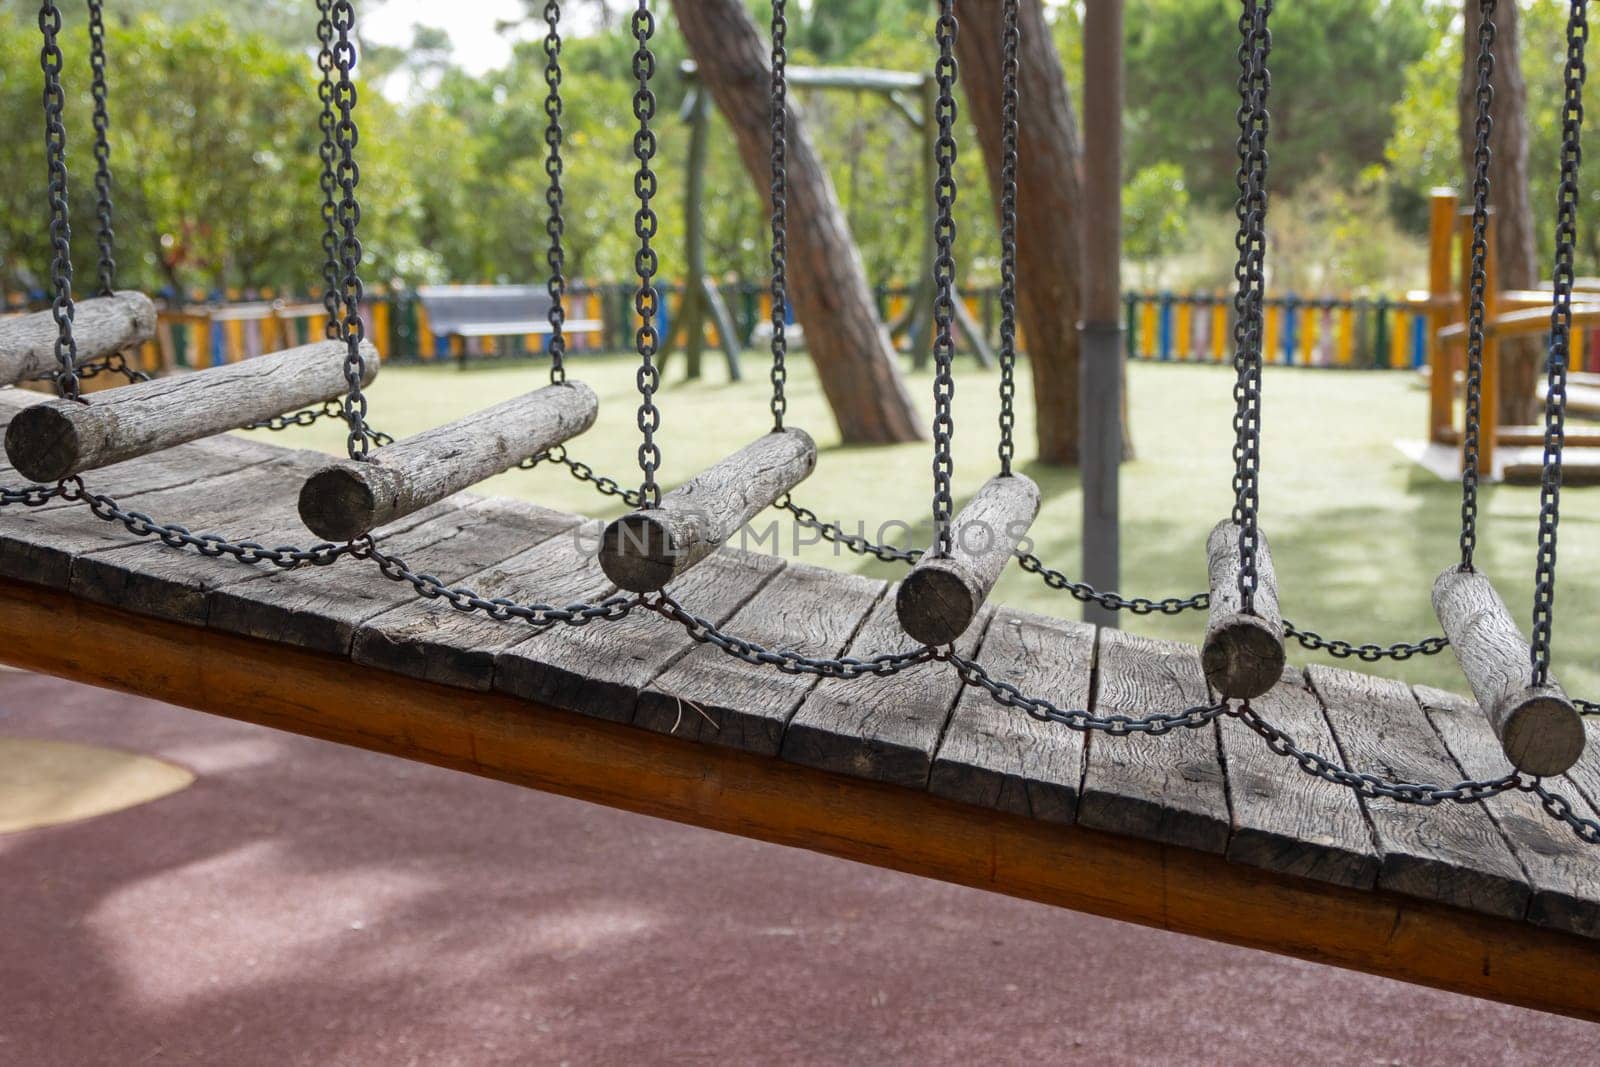 Wooden installation on the playground - wooden beams hung on chains by Studia72